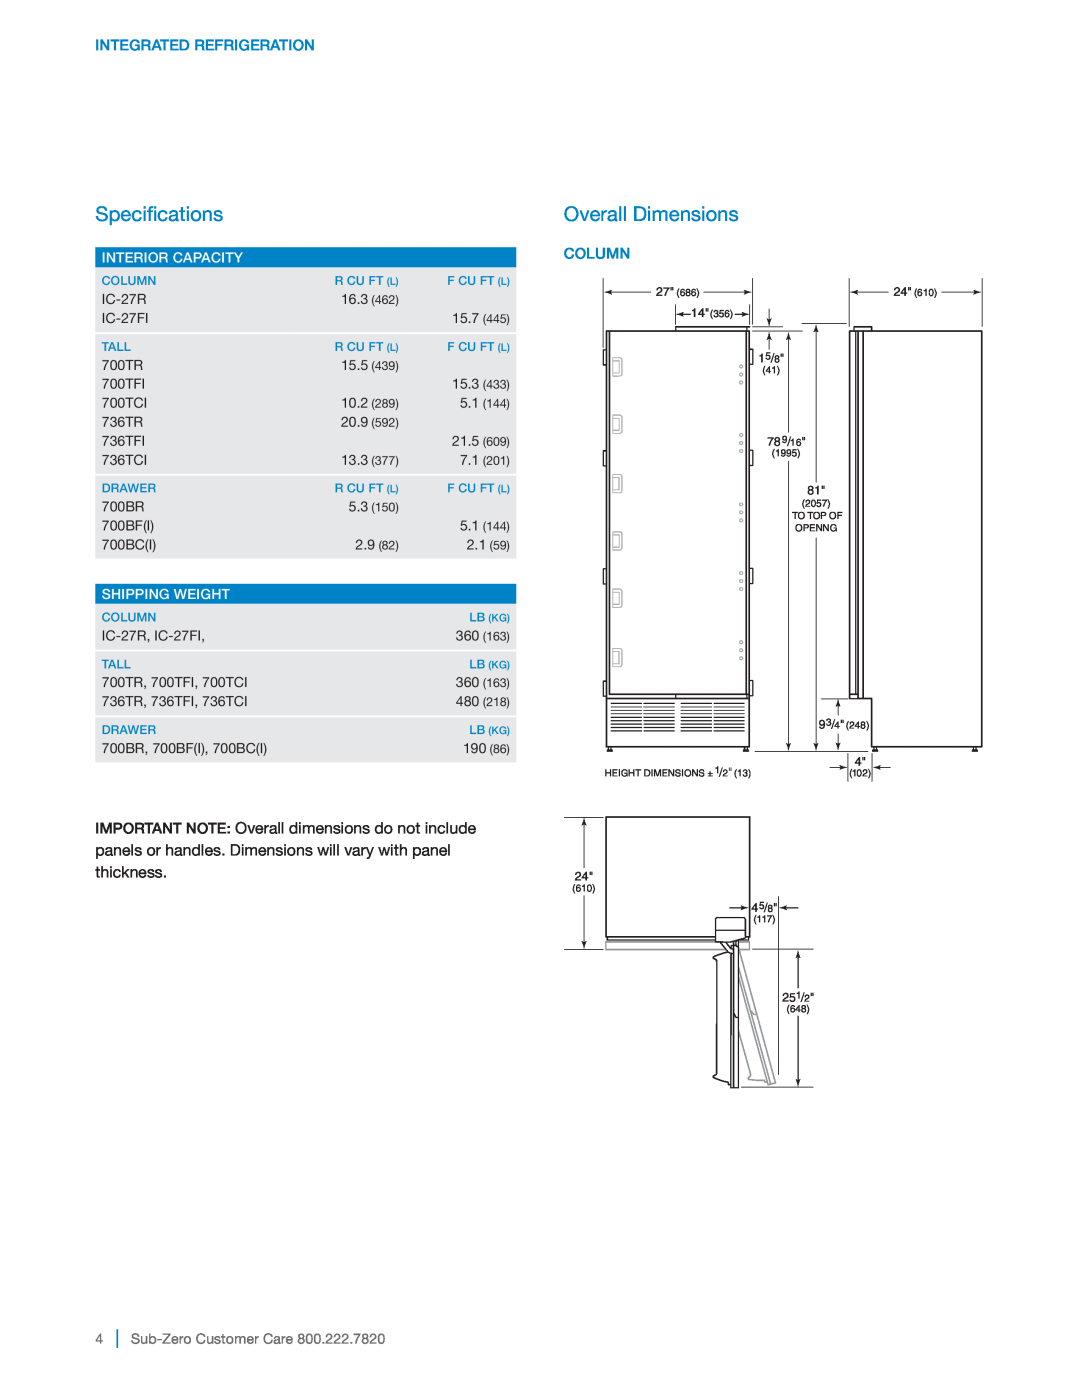 Sub-Zero 700TFI Specifications, Overall Dimensions, Integrated Refrigeration, Interior Capacity, Shipping Weight, Column 